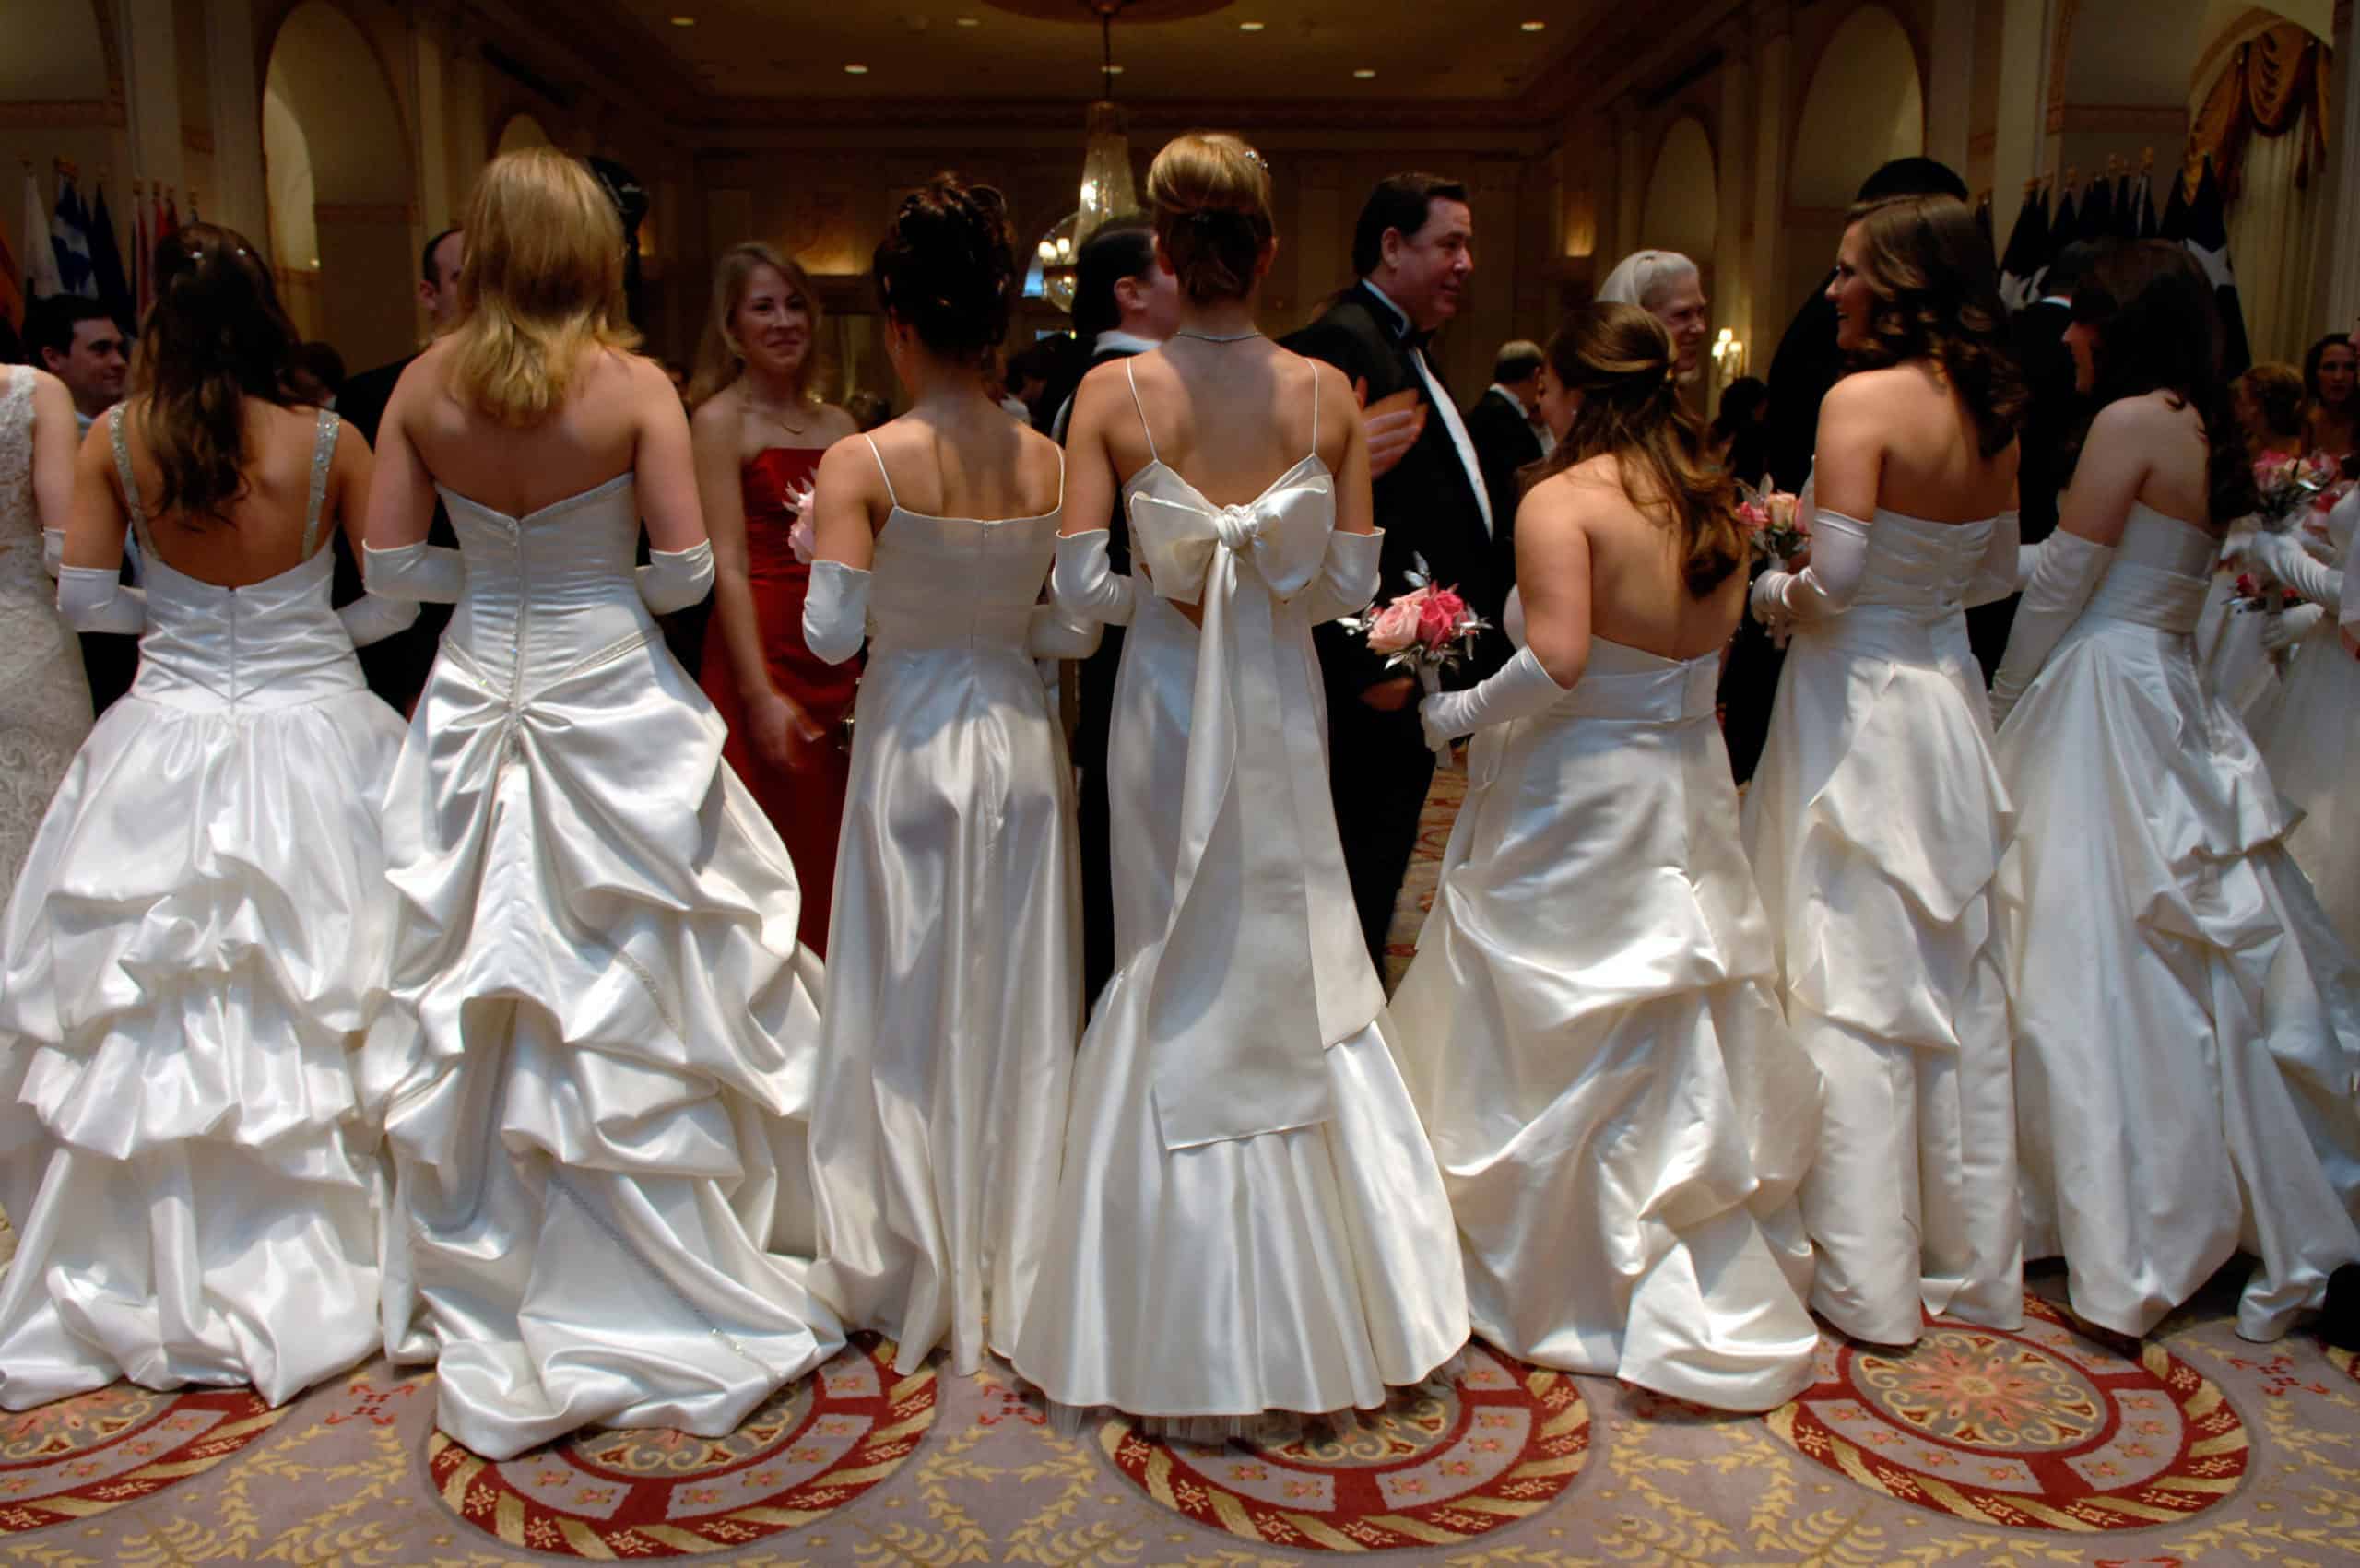 The receiving line at the 52nd International Debutante Ball at the Waldorf Astoria Hotel in NYC